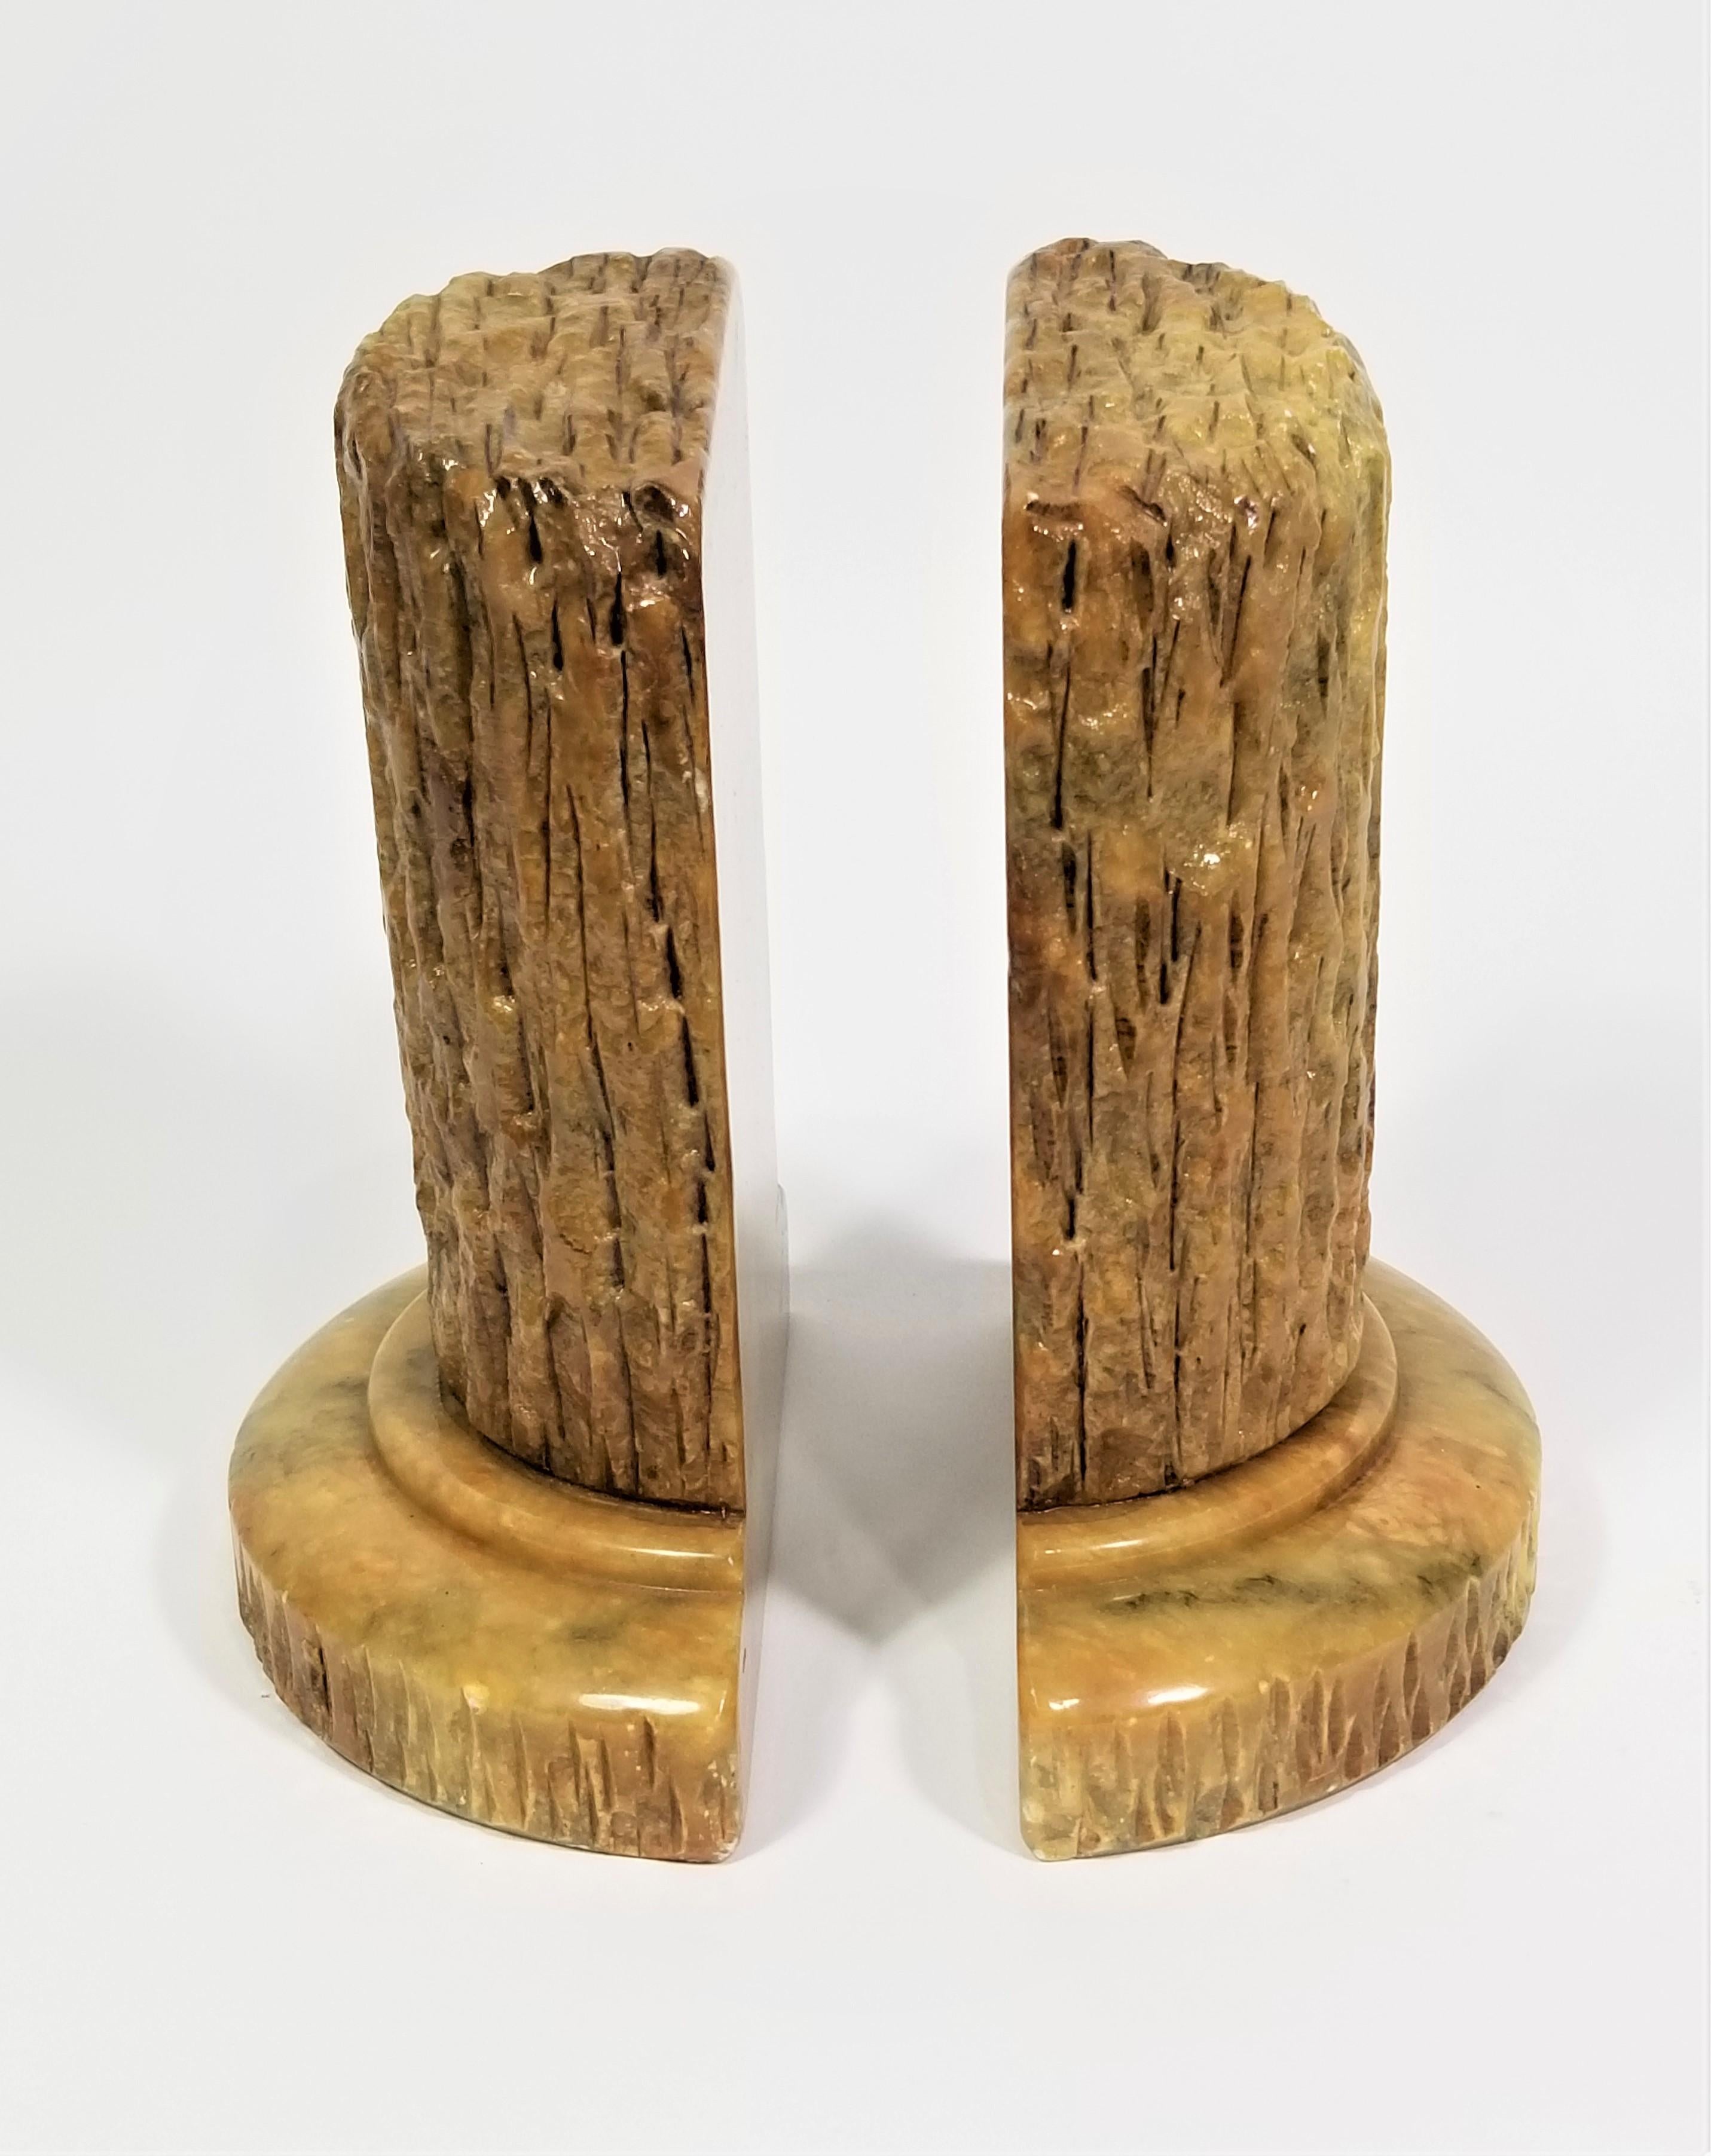 Vintage mid century Italian genuine alabaster marble bookends. Roman column shaped design. Solid alabaster with substantial weight. Made in Italy.